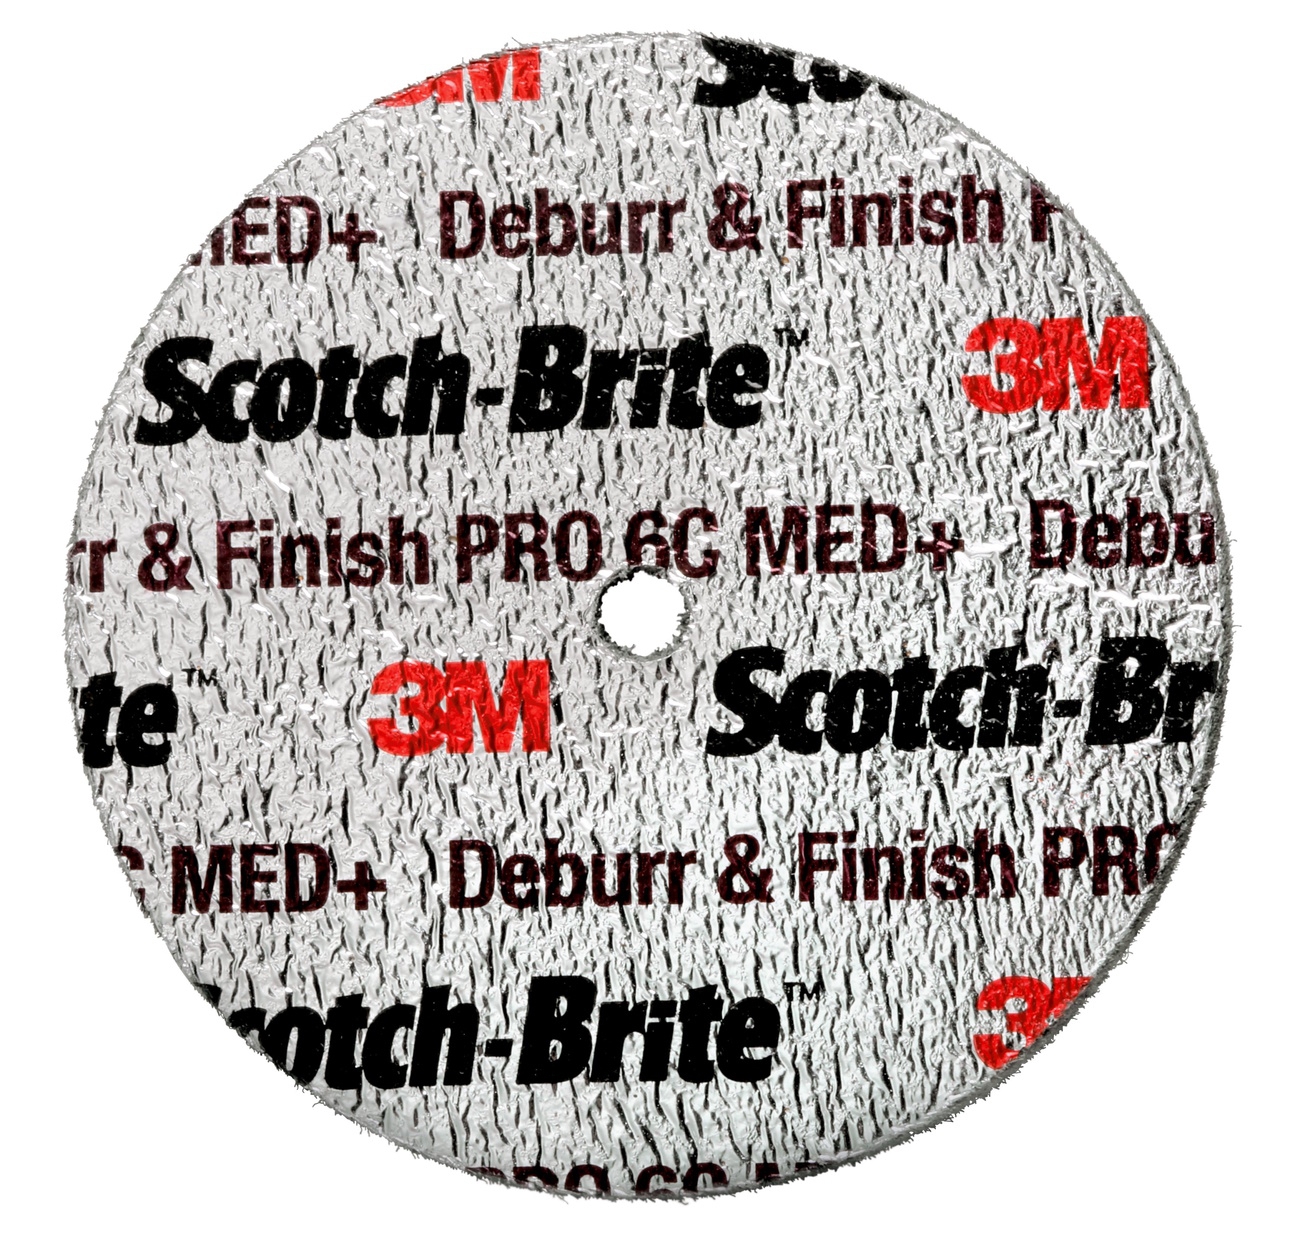 3M Scotch-Brite Deburr and Finish PRO compact disc DP-UW, 152 mm x 25.4 mm x 25.4 mm, 6C Med+, 2 WL